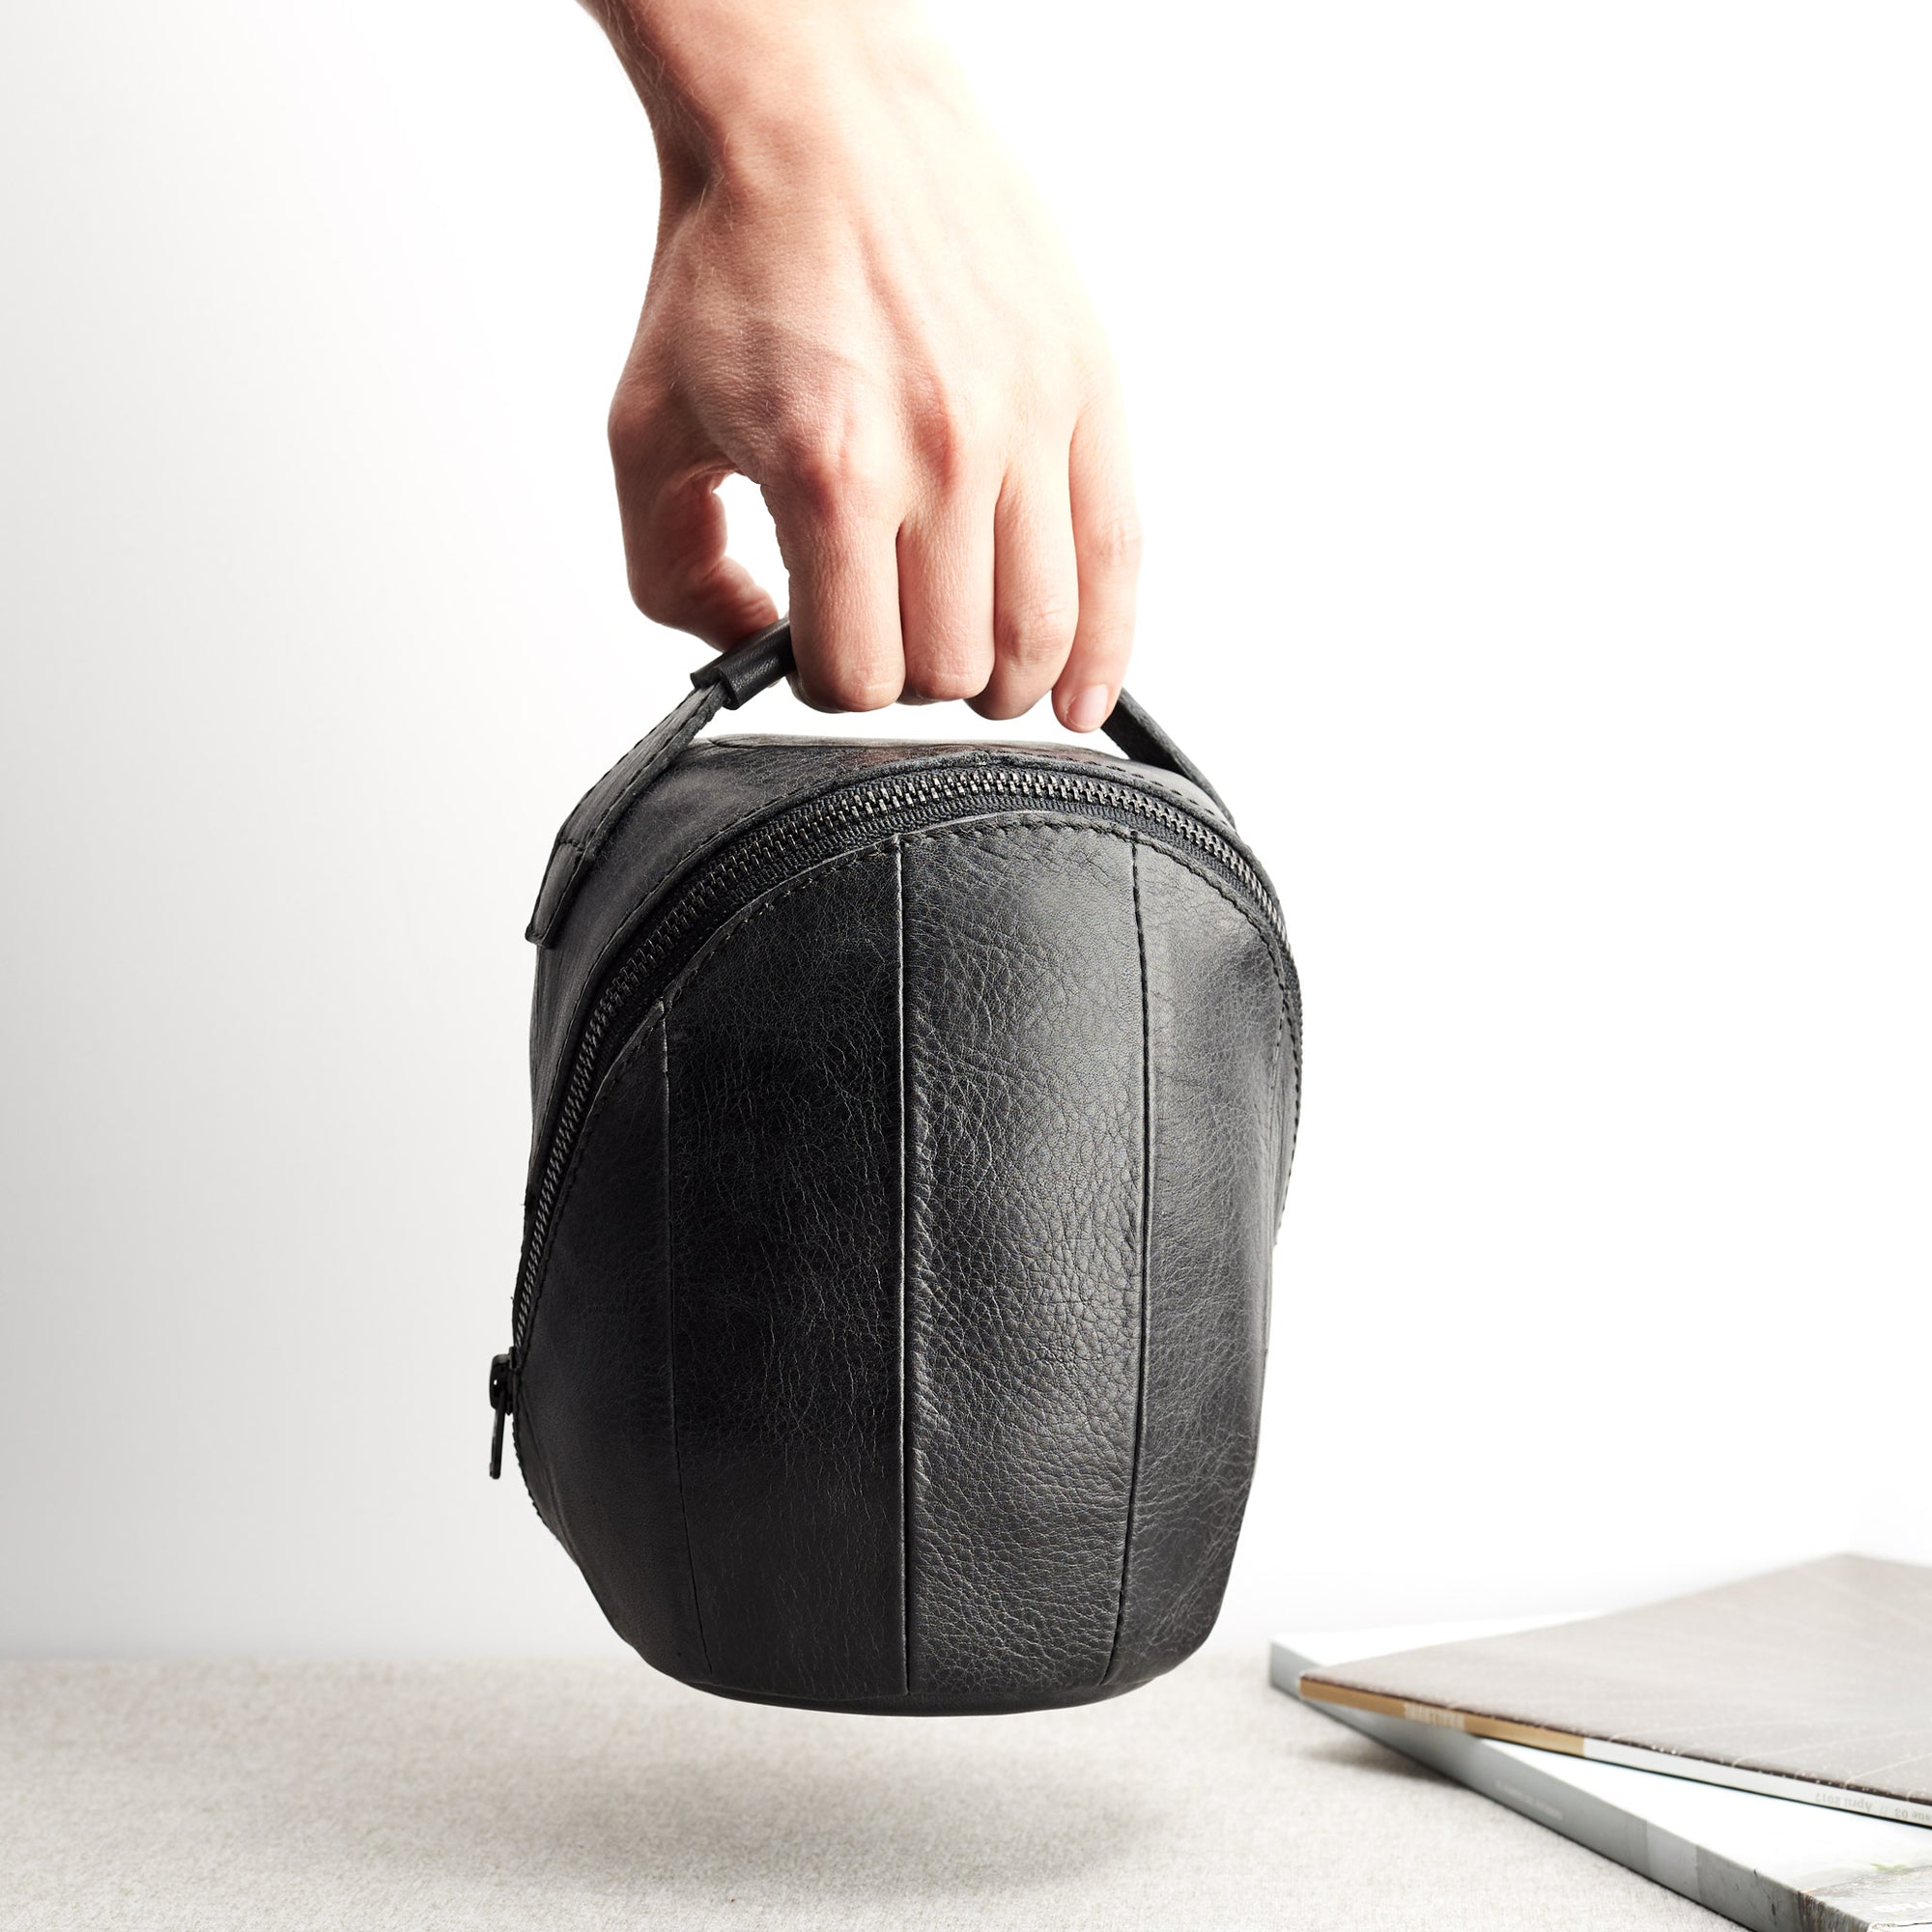 Carrying the HomePod. HomePod black leather travel carrying case.